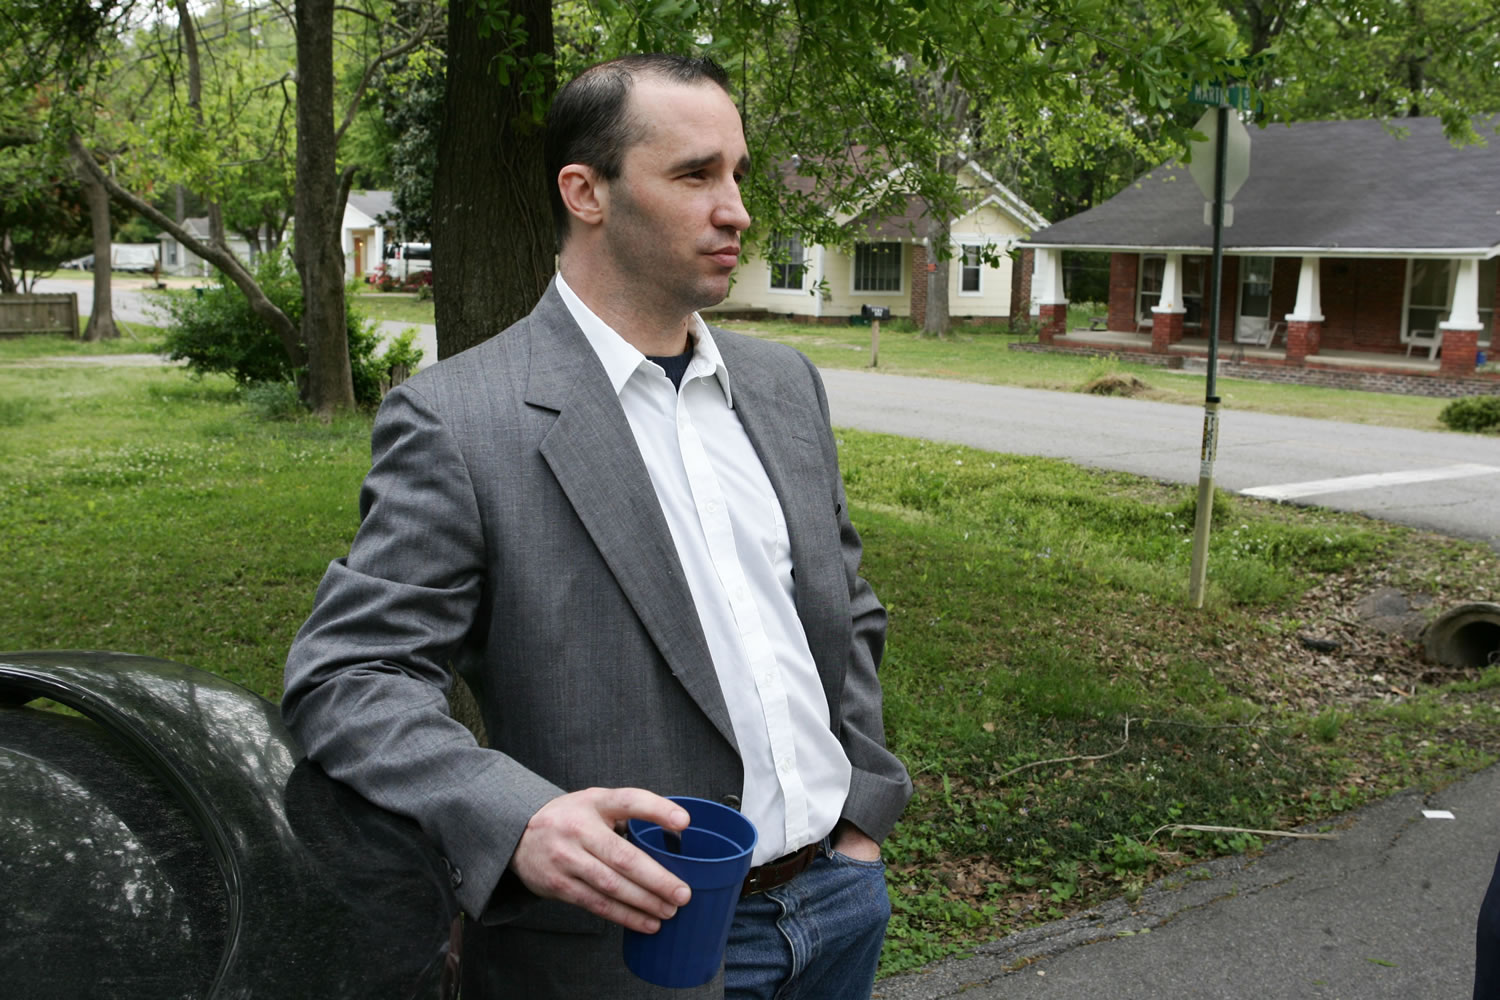 Everett Dutschke stands in the steet near his home in Tupelo, Miss., and waits for the FBI to arrive and search his home Tuesday April 23, 2013 in connection with an investigation into the sending of poisoned letters to President Barack Obama and others last week.